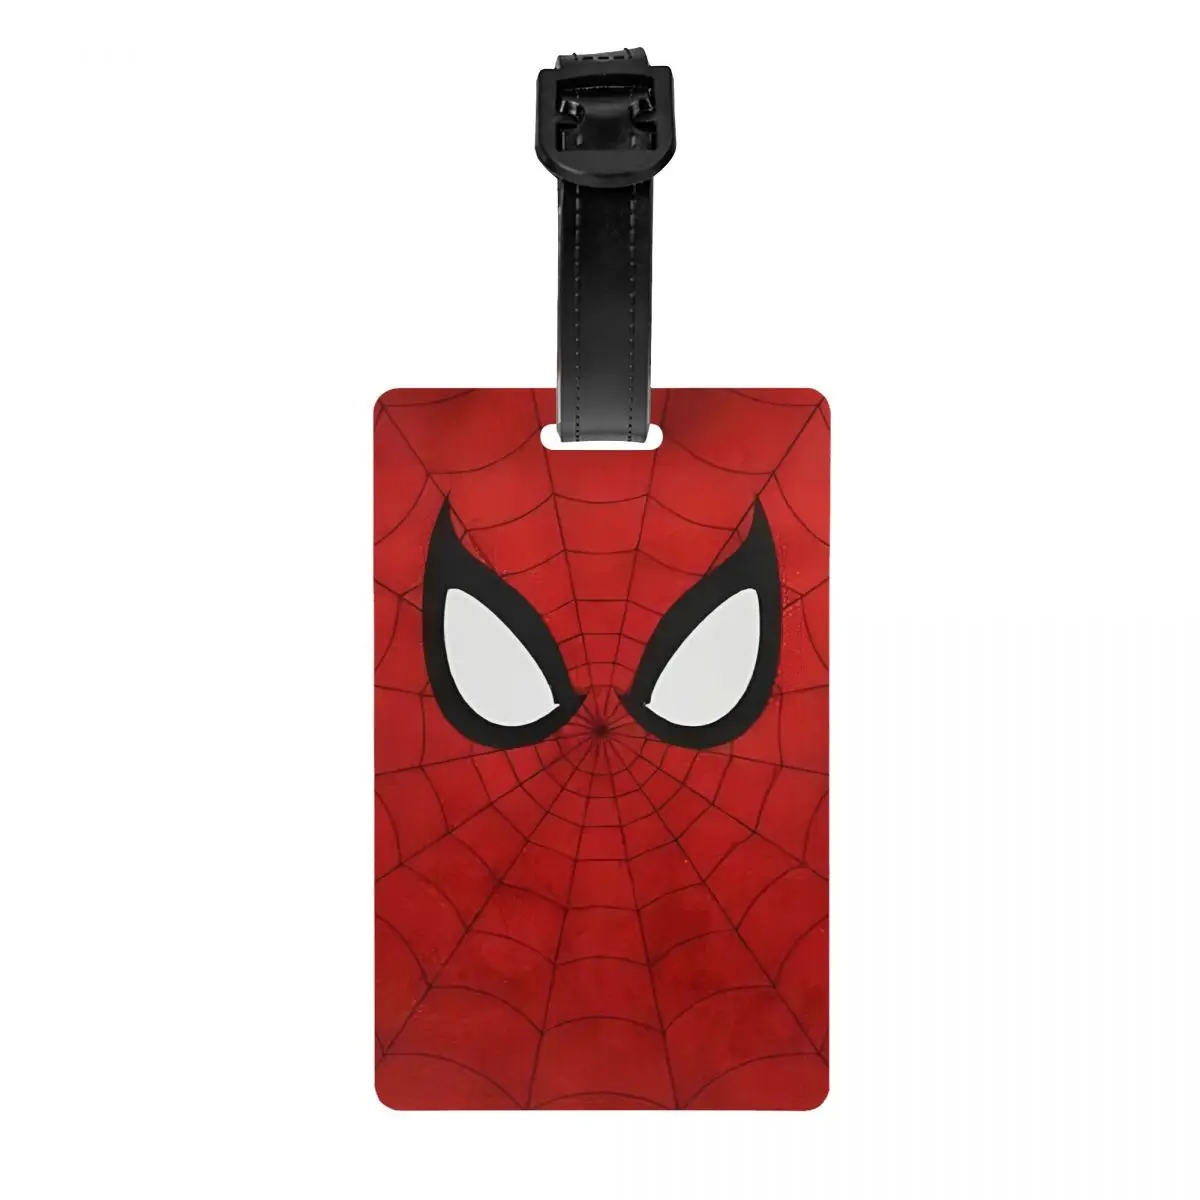 

Spider Spiderman Spiderverse Superhero Luggage Tag Suitcase Travel Accessories Label Luggage Bag Case Tags Name ID Address